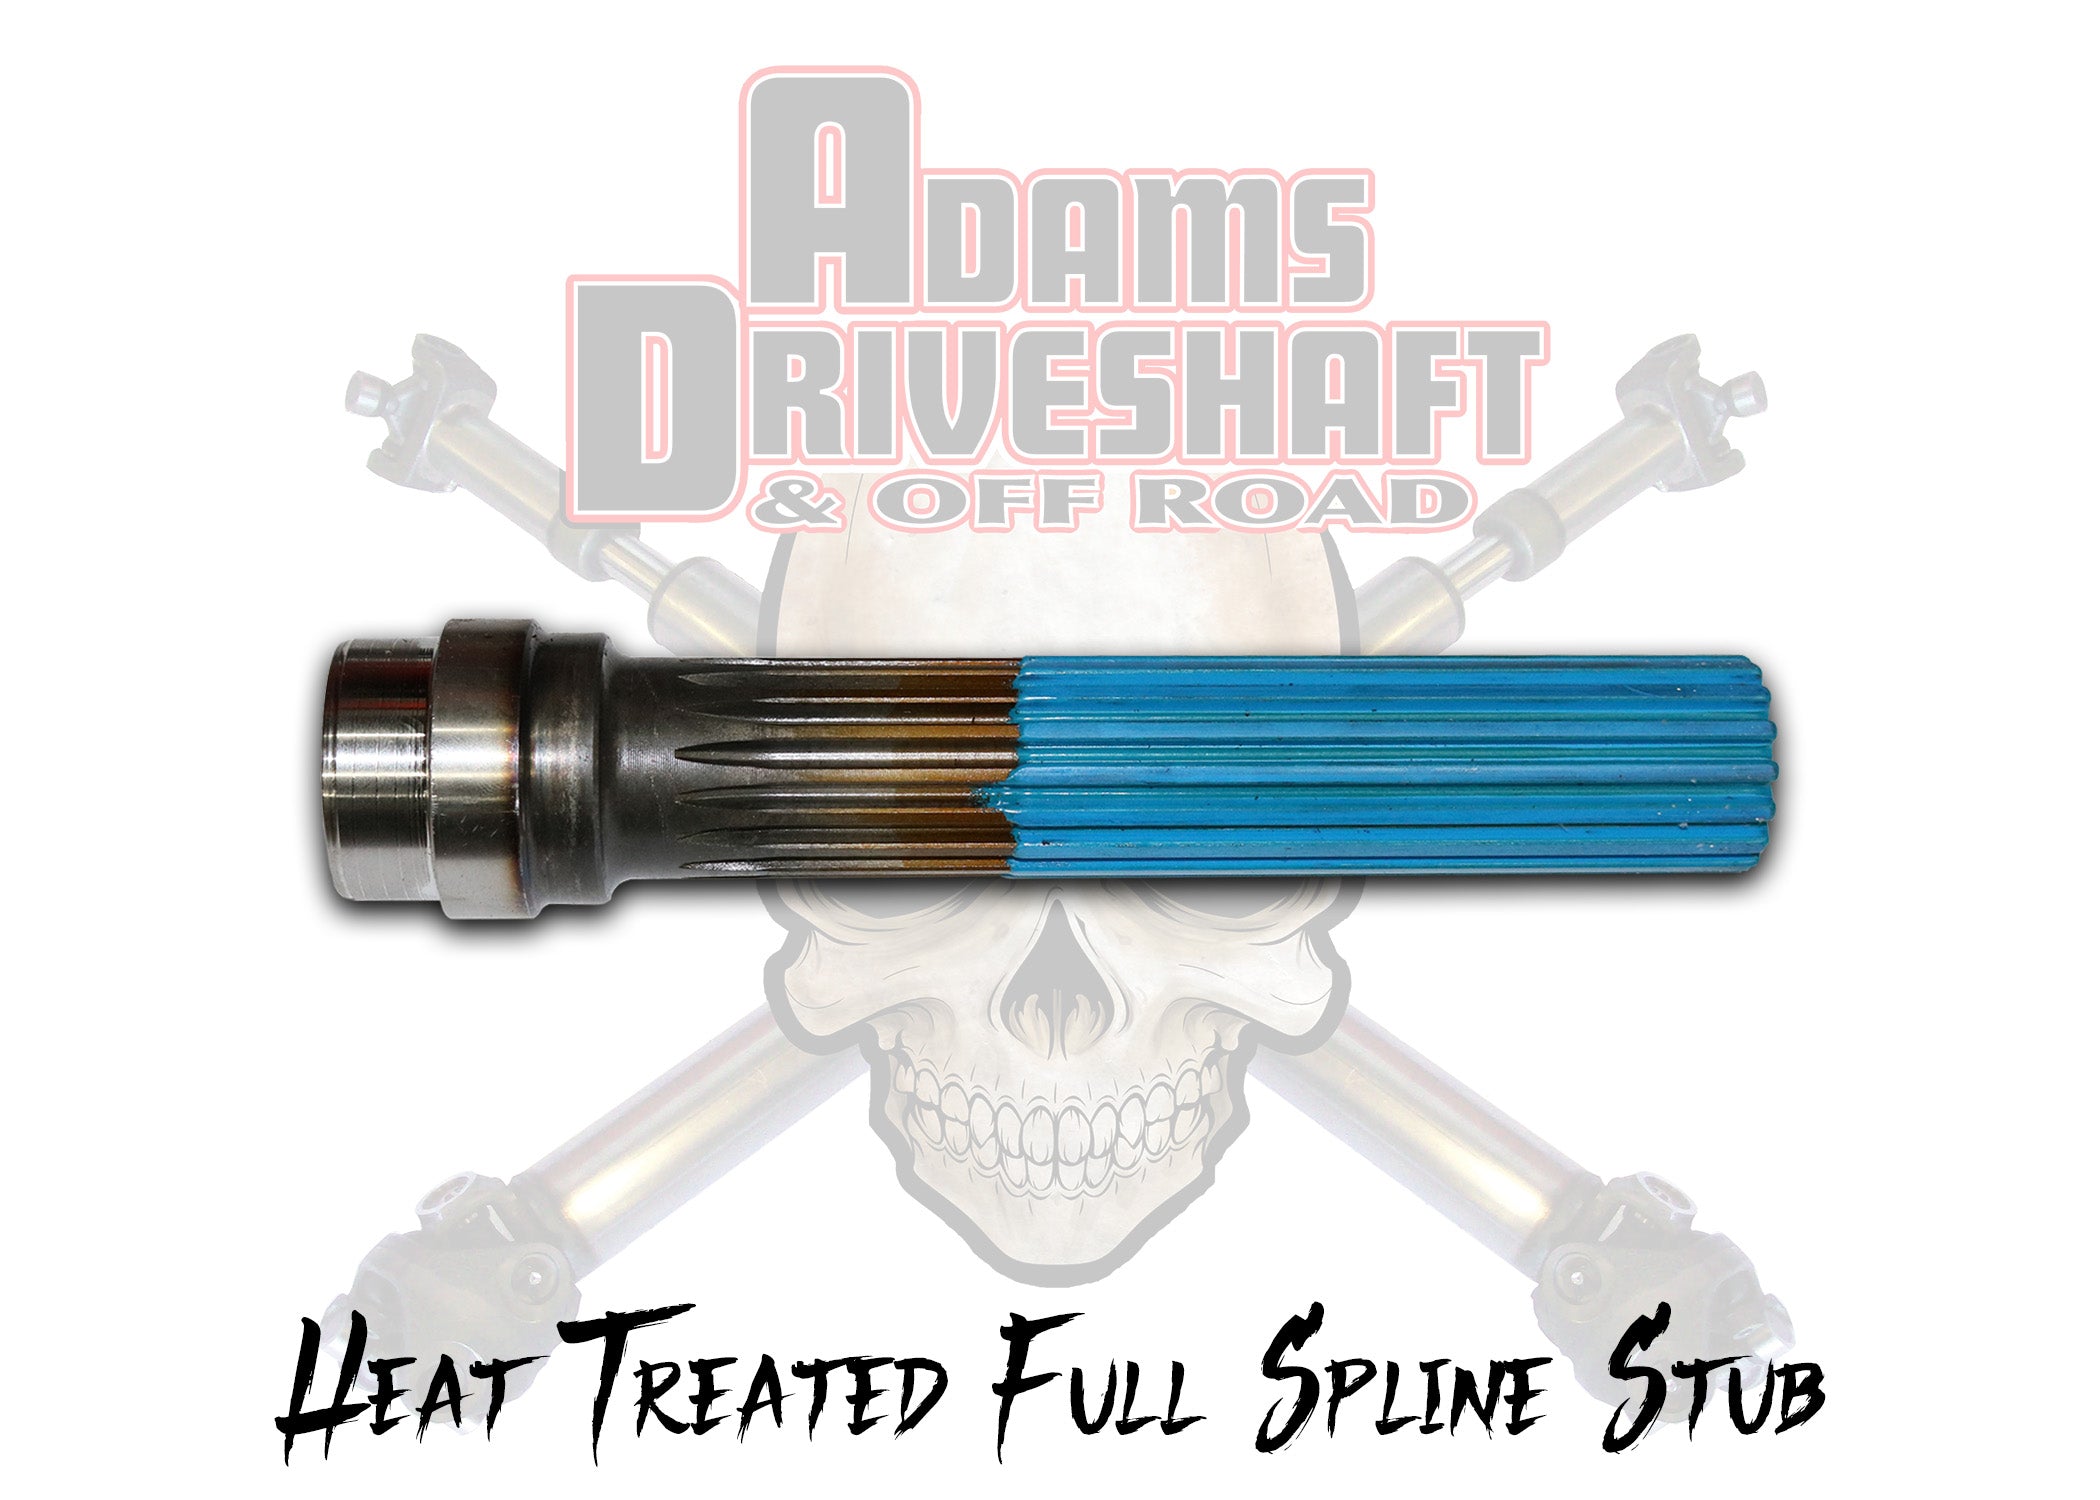 Adams Driveshaft's Build your Own - DIY - Offroad Buggy, Jeep Driveshaft, Etc. in 1410 Series